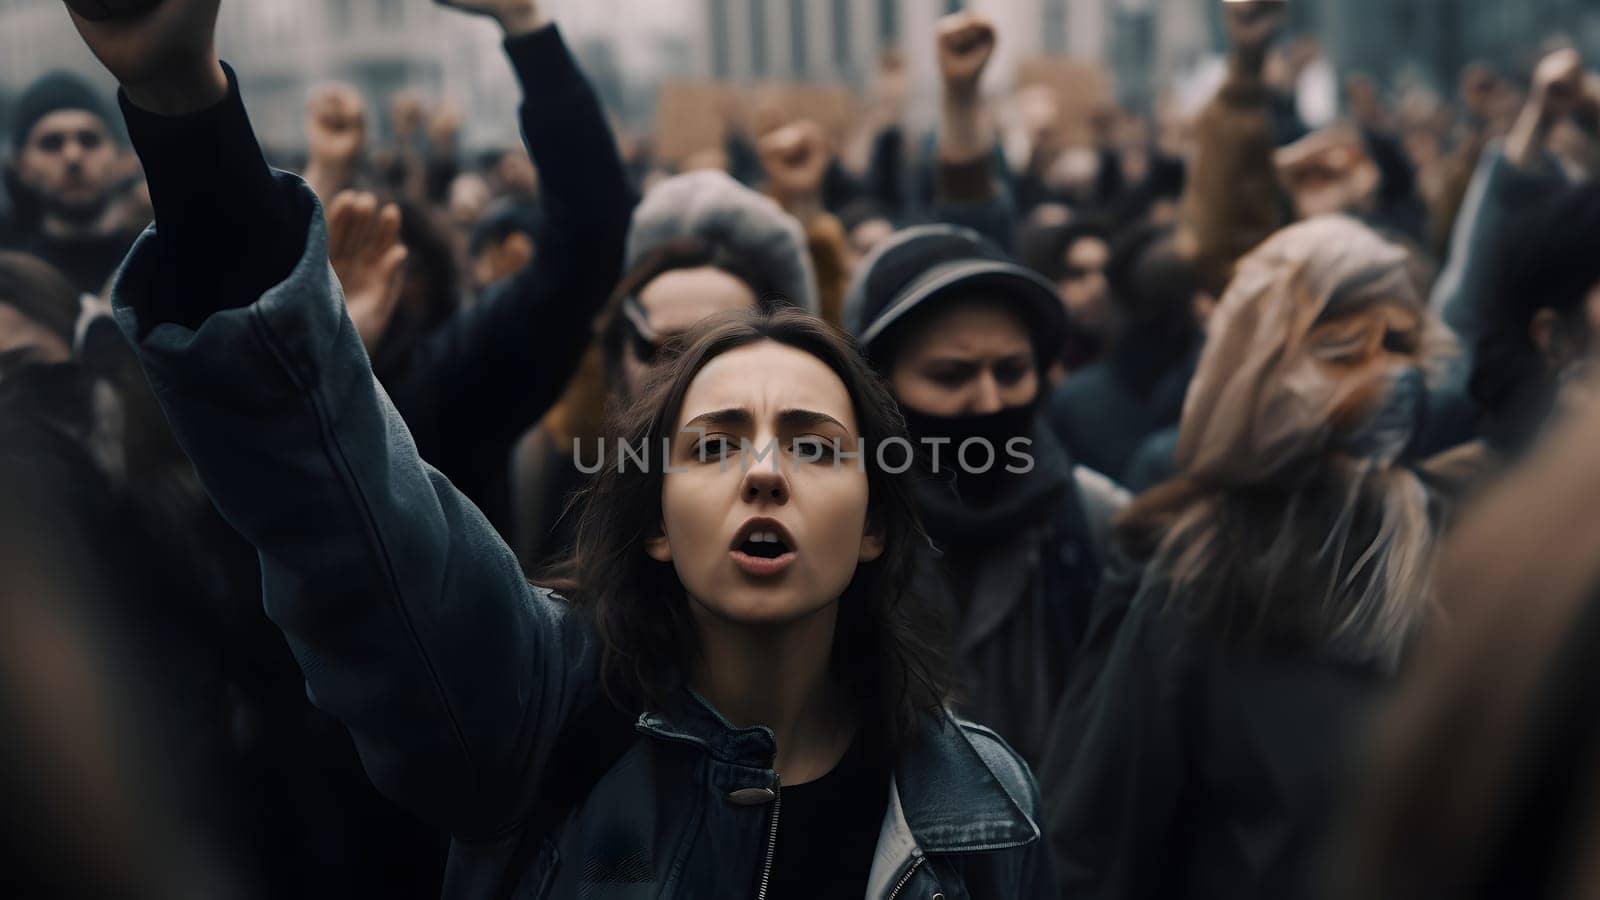 People protest at city streets at day time, hyperrealistic style. Neural network generated in May 2023. Not based on any actual person, scene or pattern.